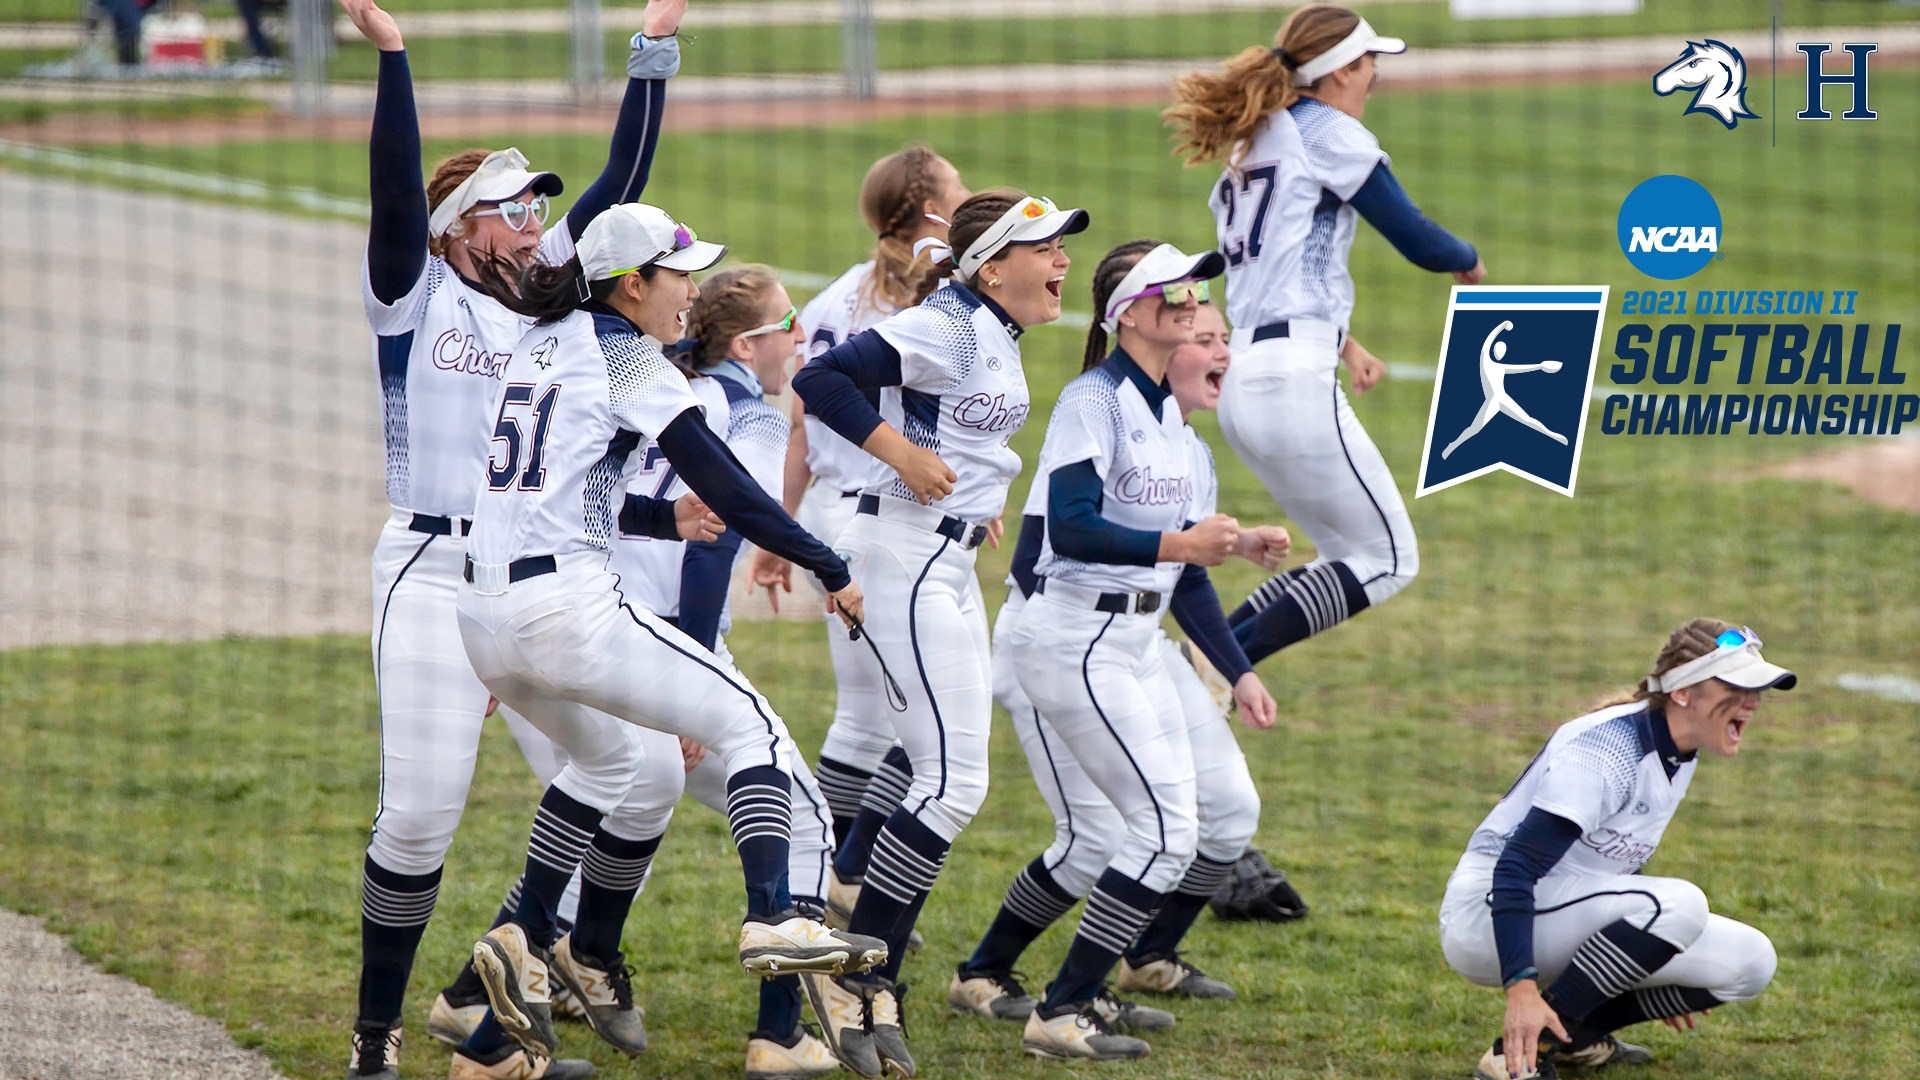 Preview: Fifth-seeded Charger softball team prepared for third NCAA appearance in four years